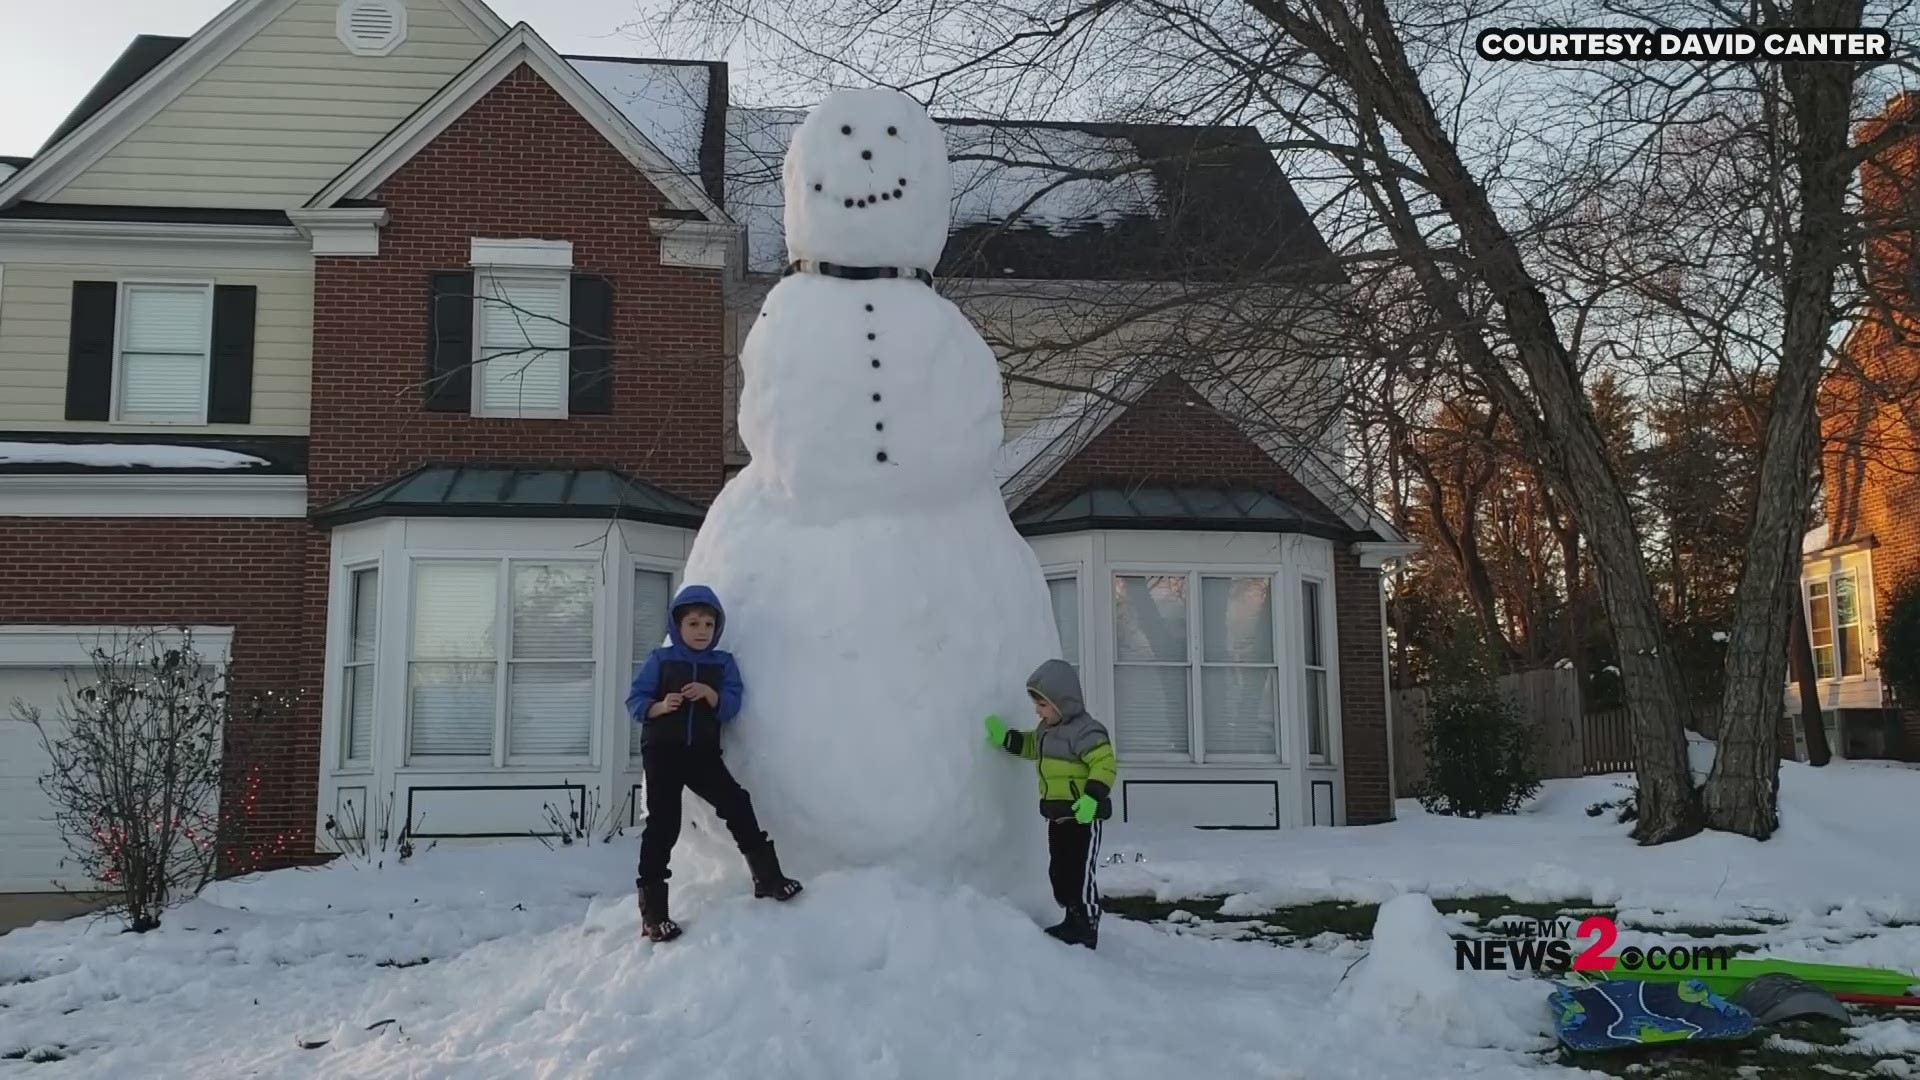 It took David Canter six hours to make the giant 12-foot snowman at his house in Greensboro. He also got some help from his two boys.